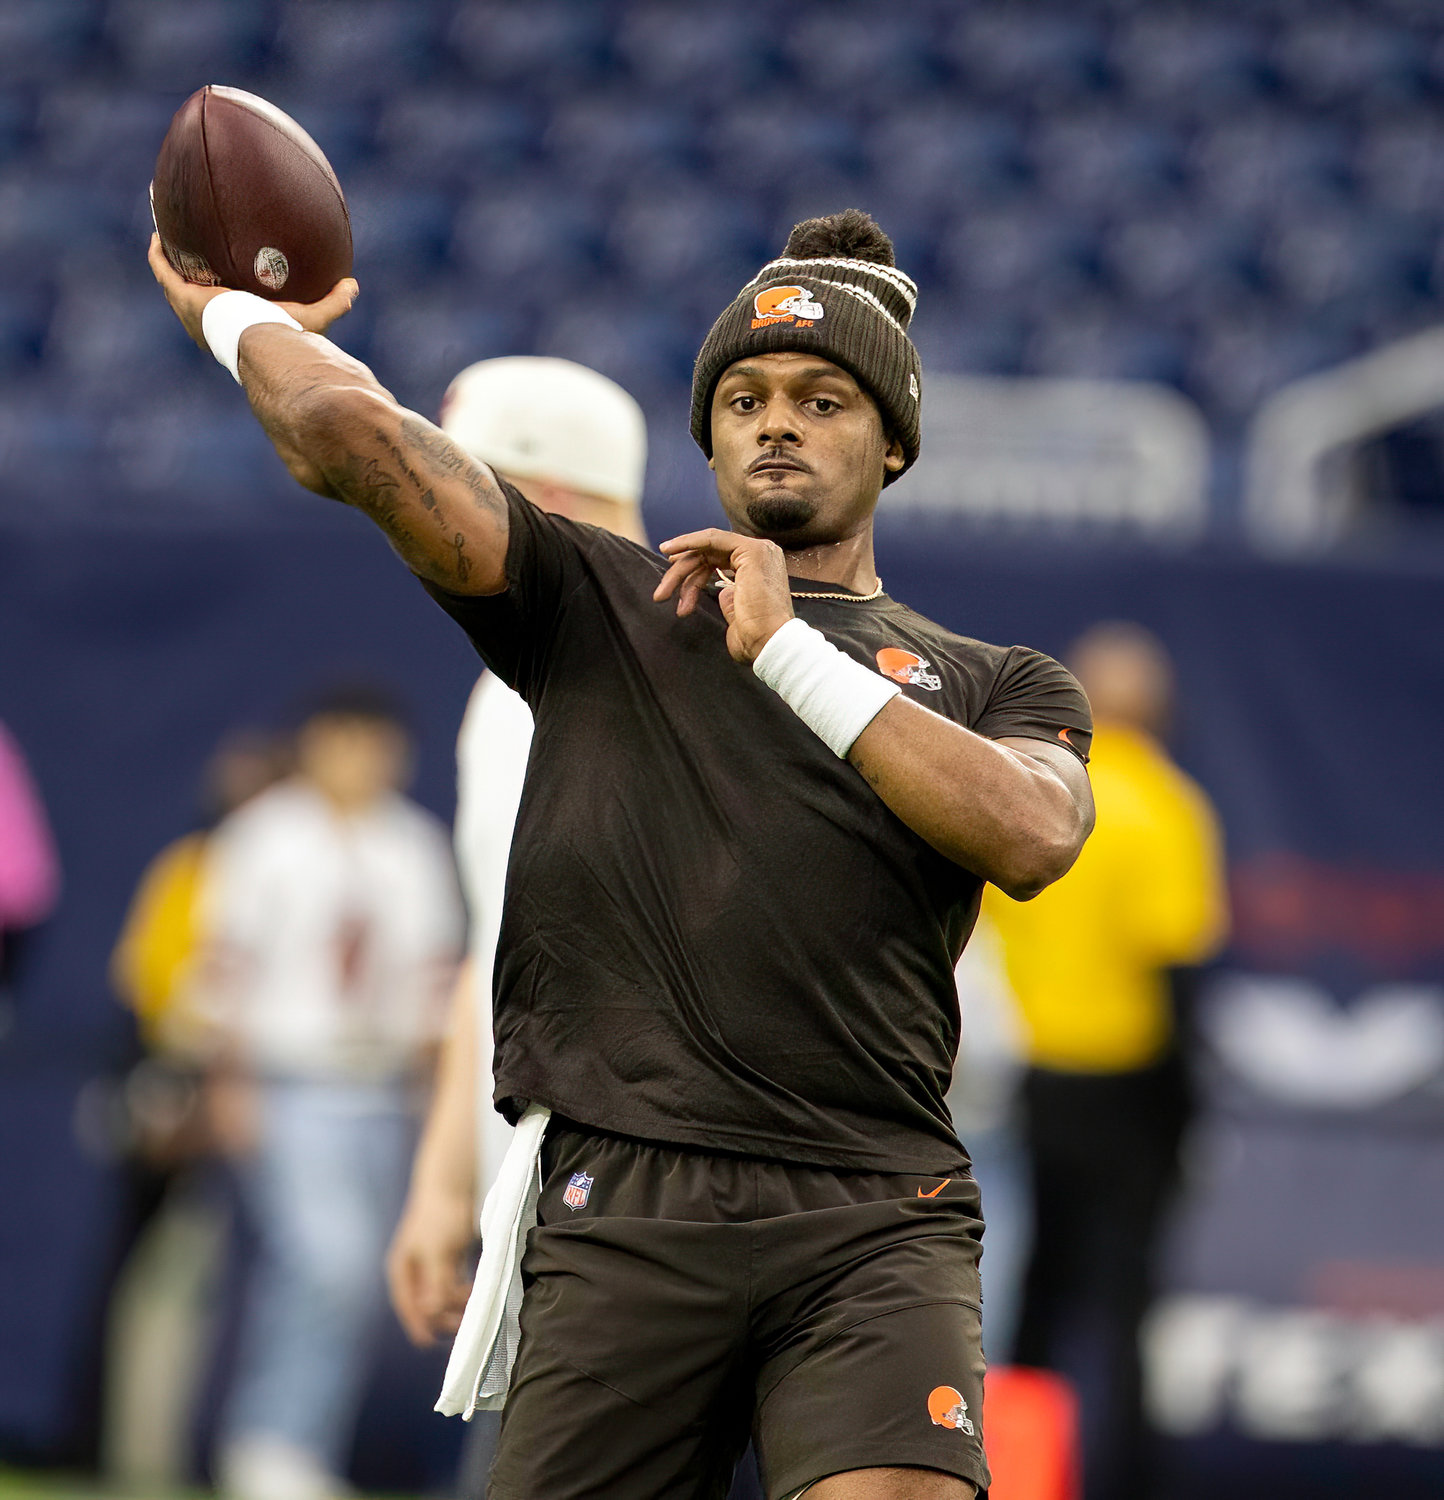 Former Houston Texans and current Cleveland Browns quarterback Deshaun Watson warms up before an NFL game on Dec. 4, 2022, in Houston. The game marks the controversial quarterback’s return to Houston and first game back after an 11-game suspension for allegations of sexual misconduct during his tenure with the Texans.